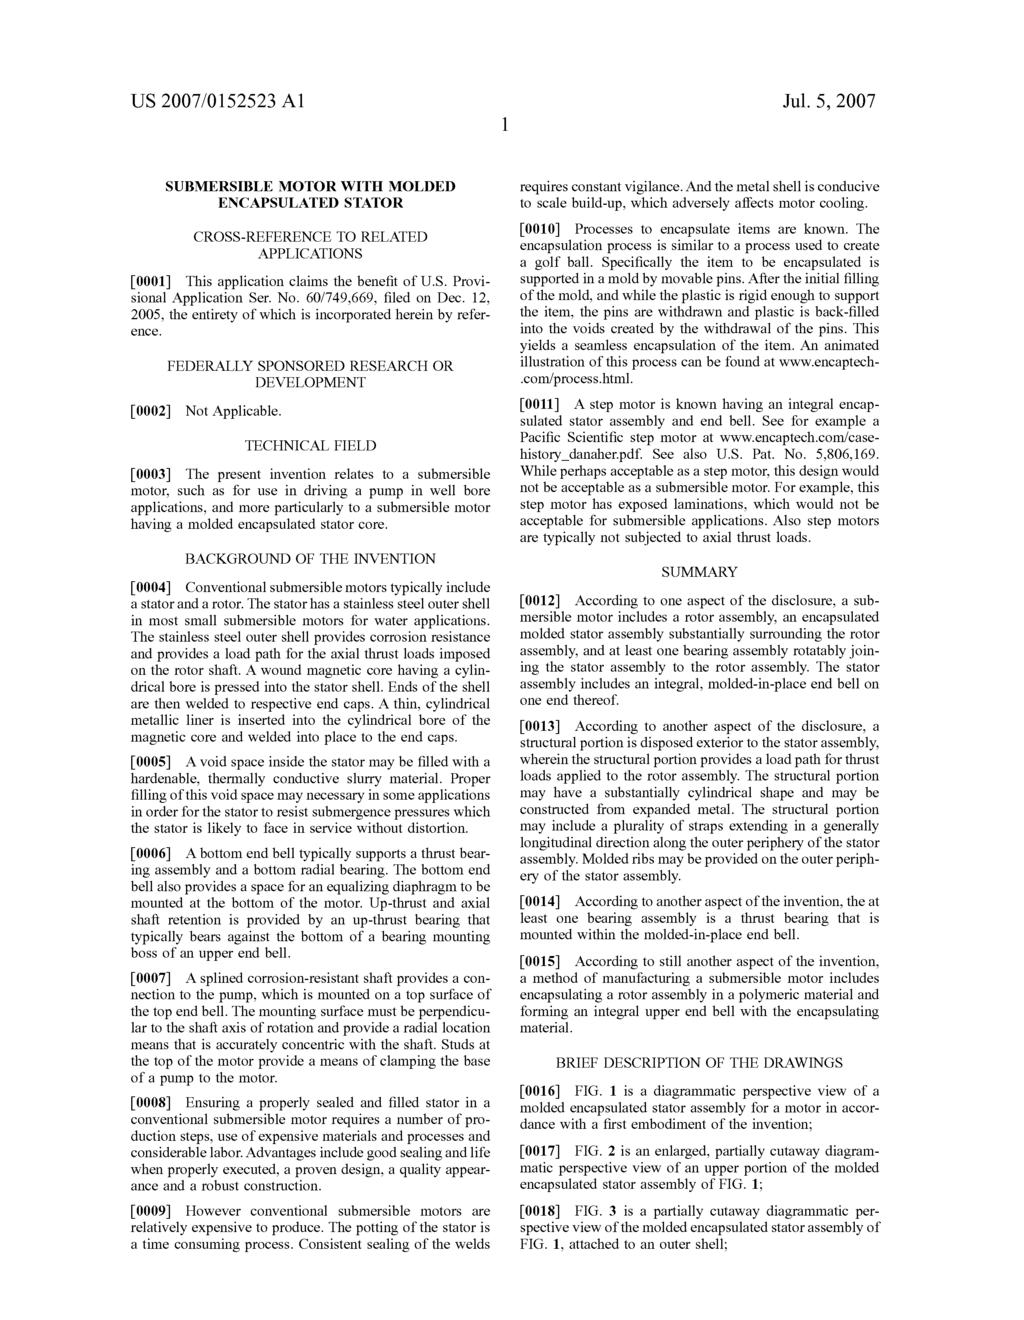 US 2007/0152523 A1 Jul. 5, 2007 SUBMERSIBLE MOTOR WITH MOLDED ENCAPSULATED STATOR CROSS-REFERENCE TO RELATED APPLICATIONS 0001) This application claims the benefit of U.S. Provi sional Application Ser.